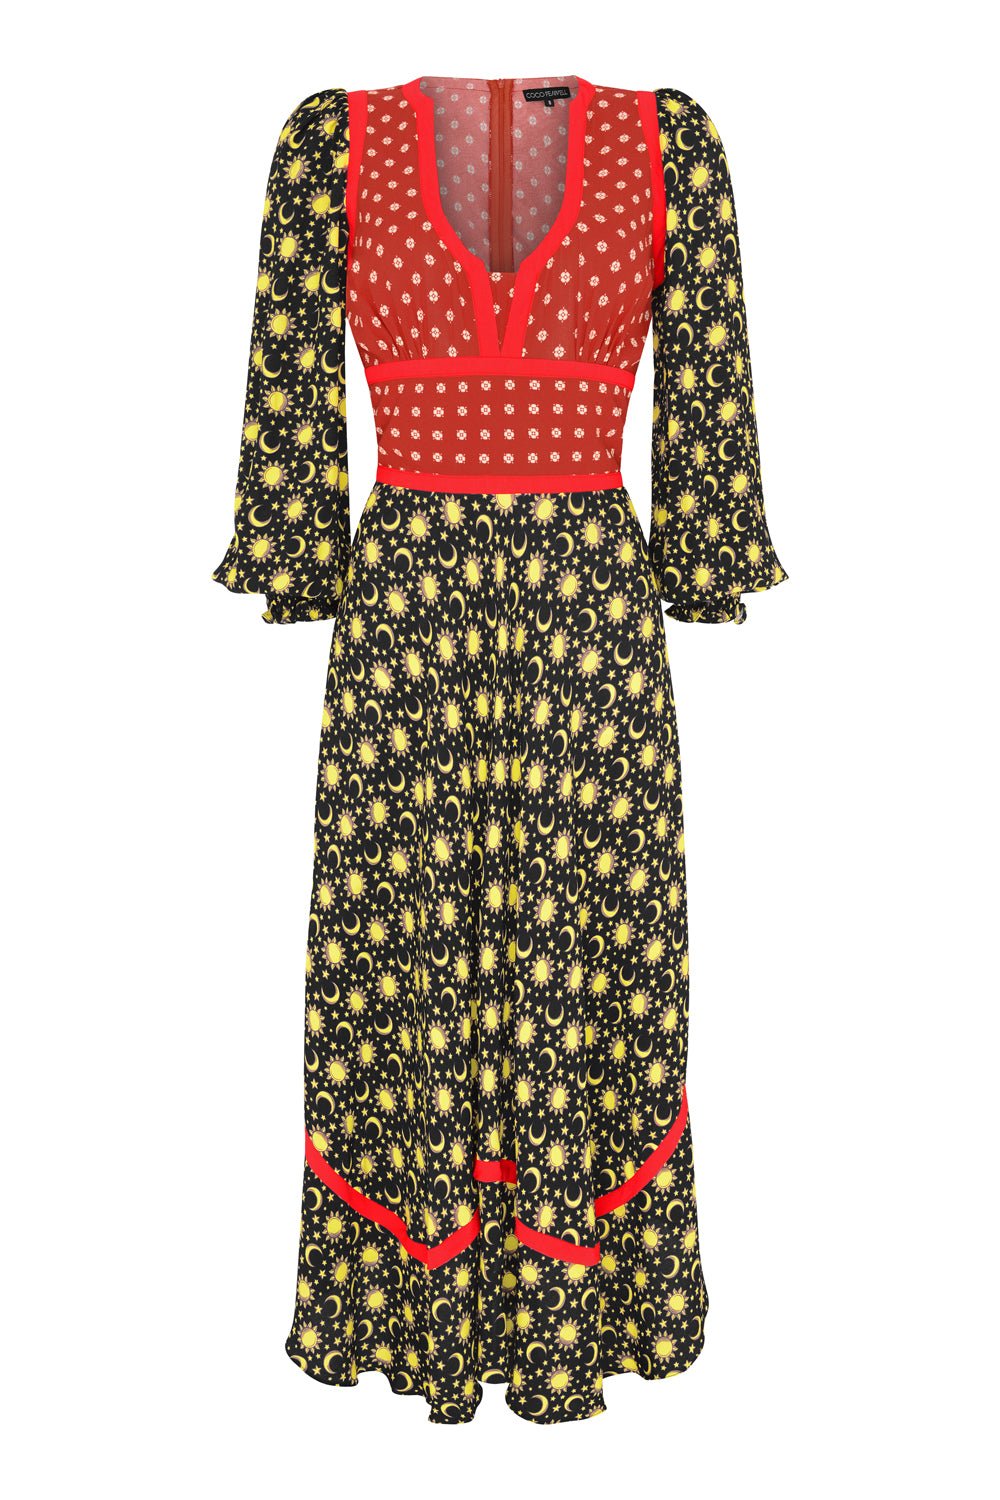 Sun and moon dress - Coco Fennell